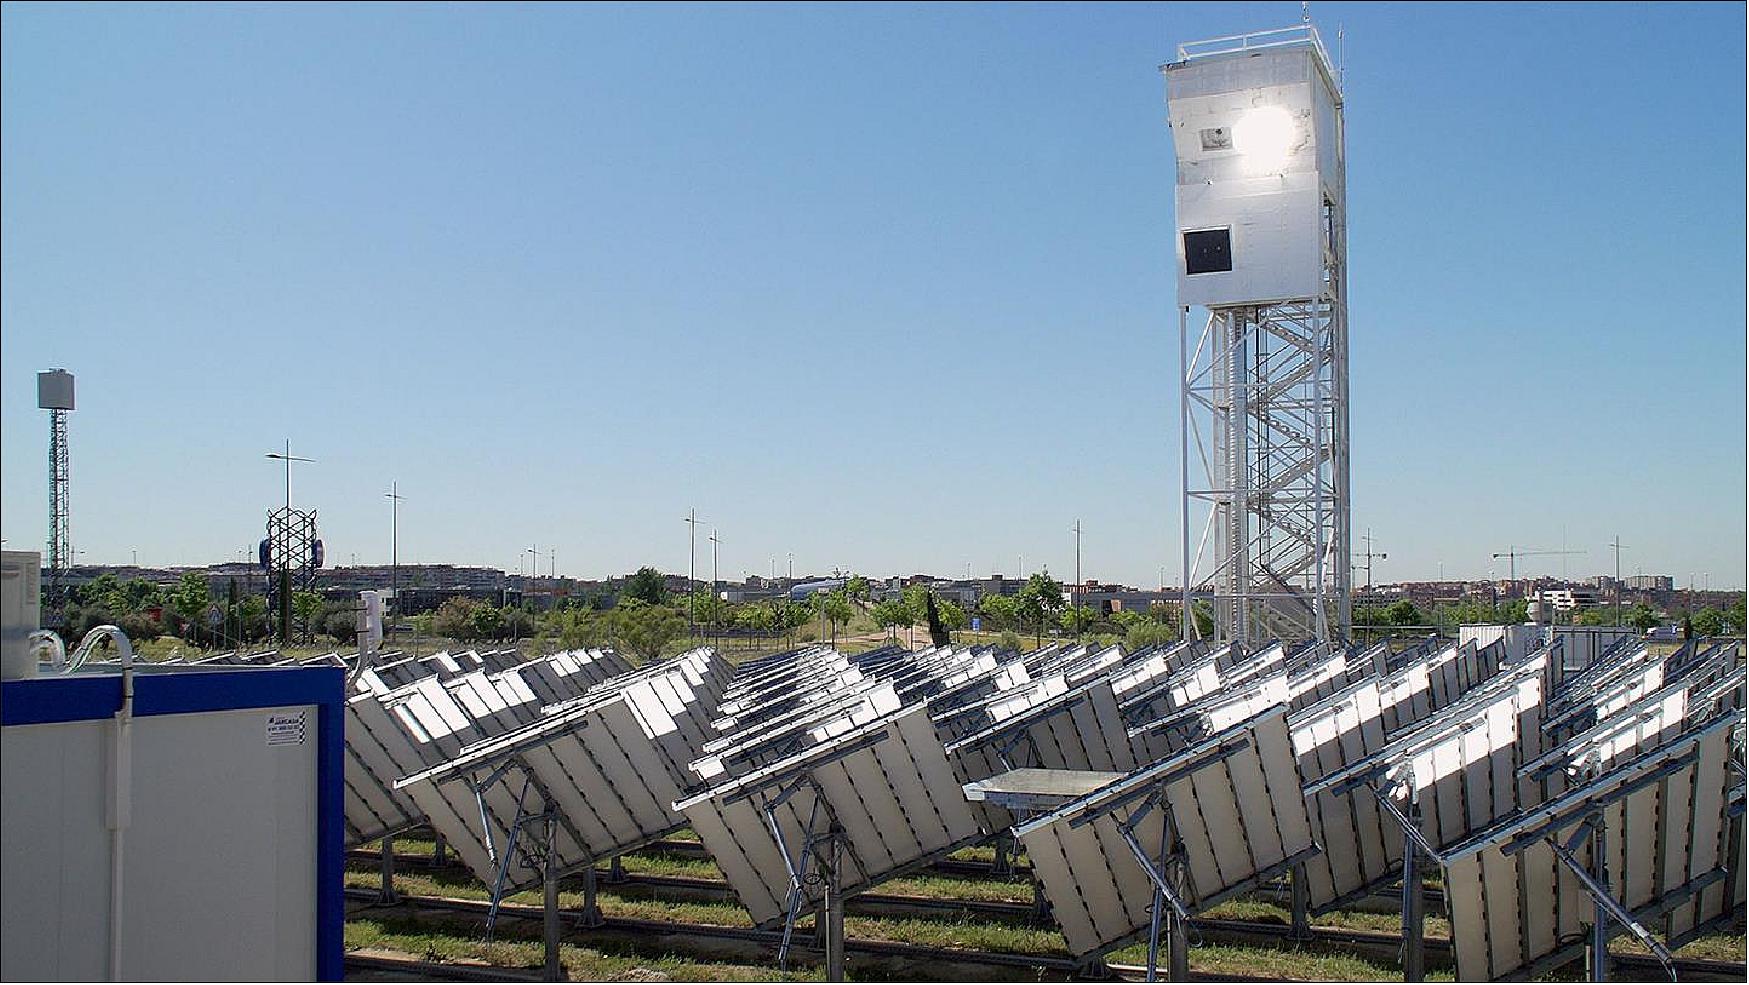 Figure 56: The sun-tracking heliostat field delivers radiative power to a solar reactor positioned at the top of the tower (image credit: Christophe Ramage ©ARTTIC 2019)